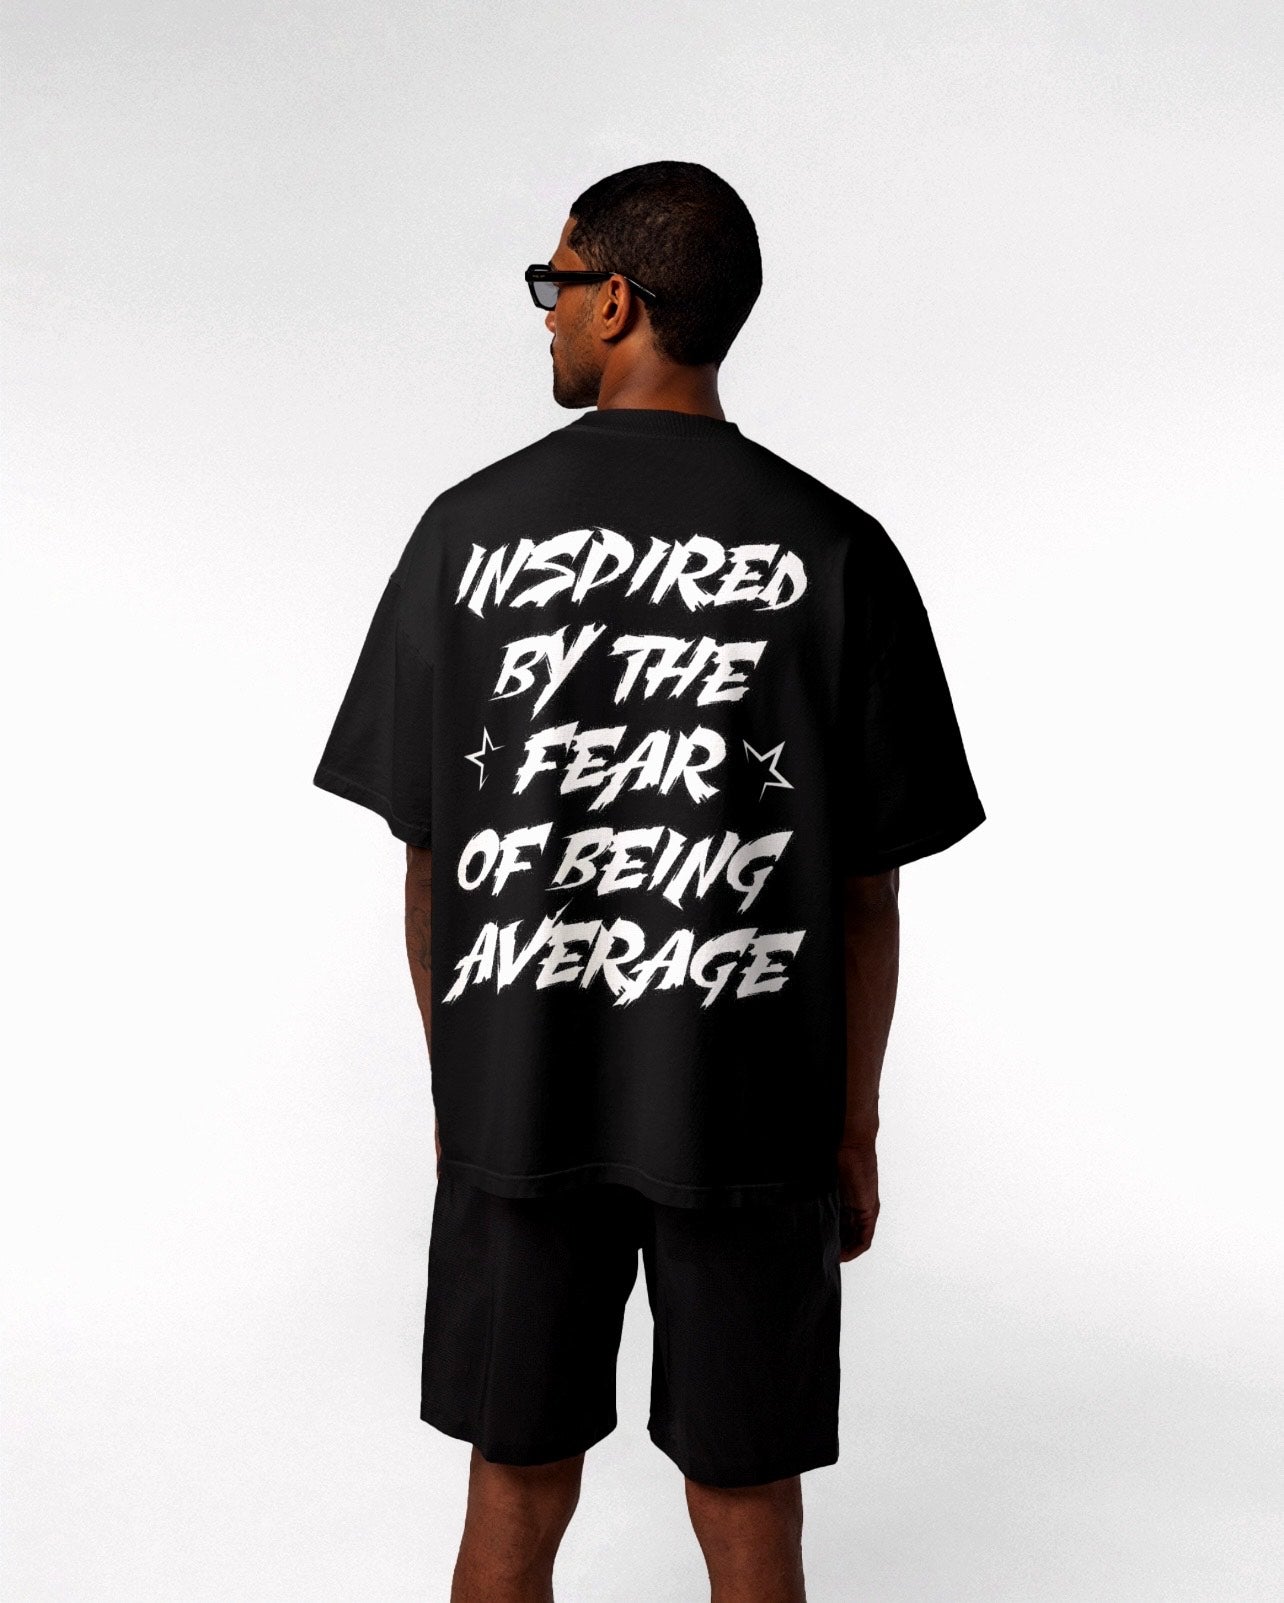 "Inspired by the Fear of being Average" Tee (Black)